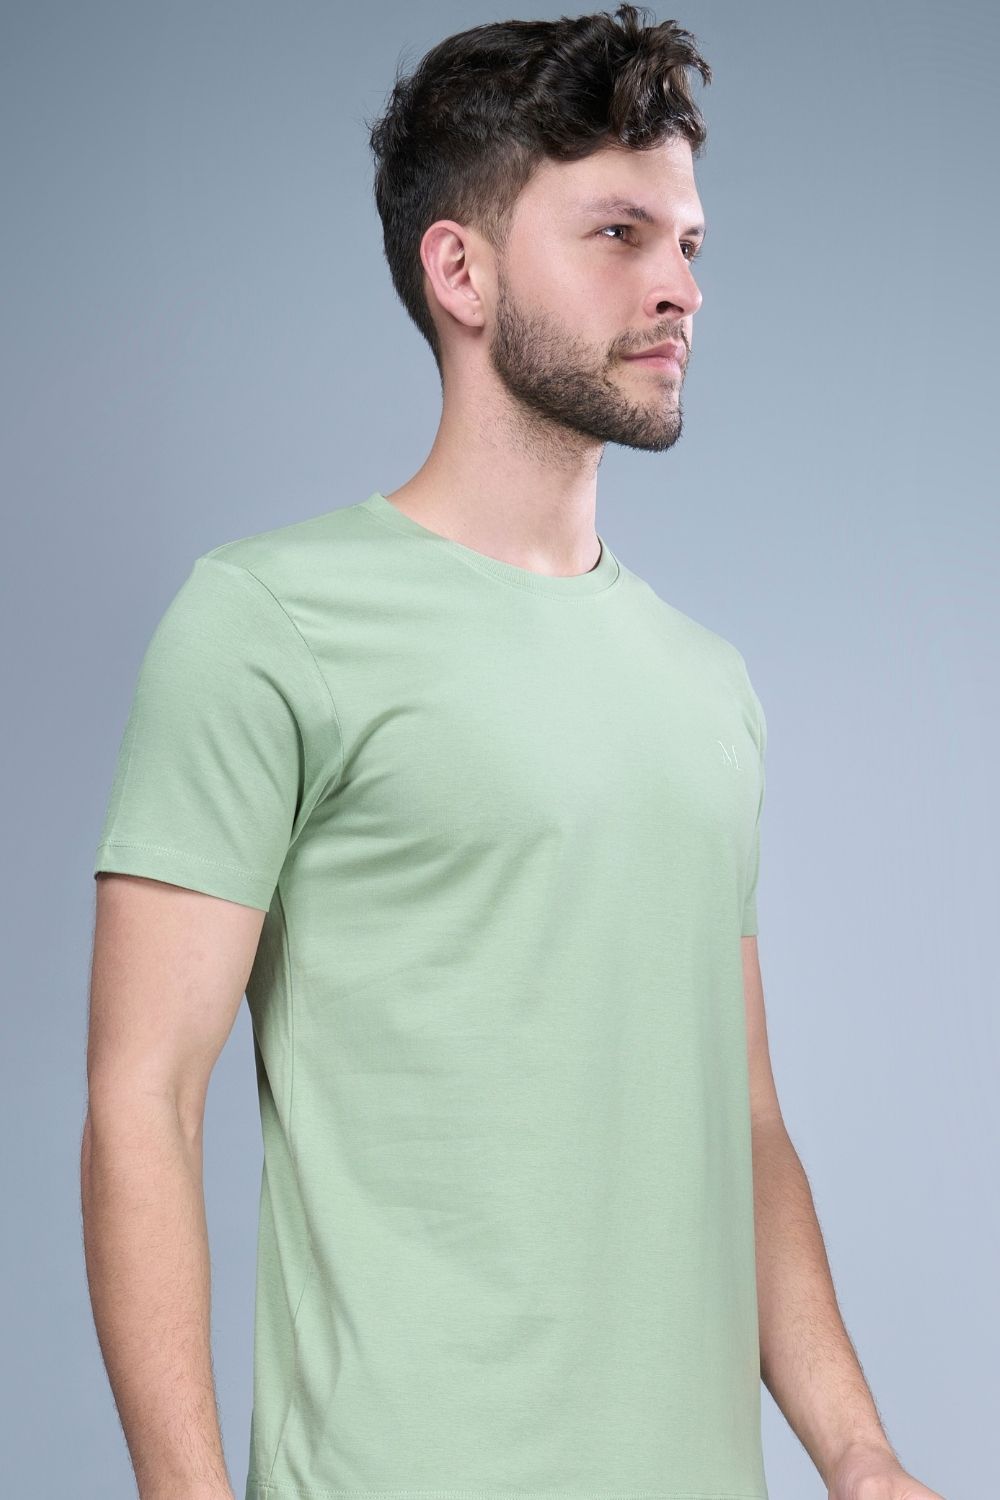 Green colored, cotton Graphic T shirt for men with half sleeves and round neck, side view.